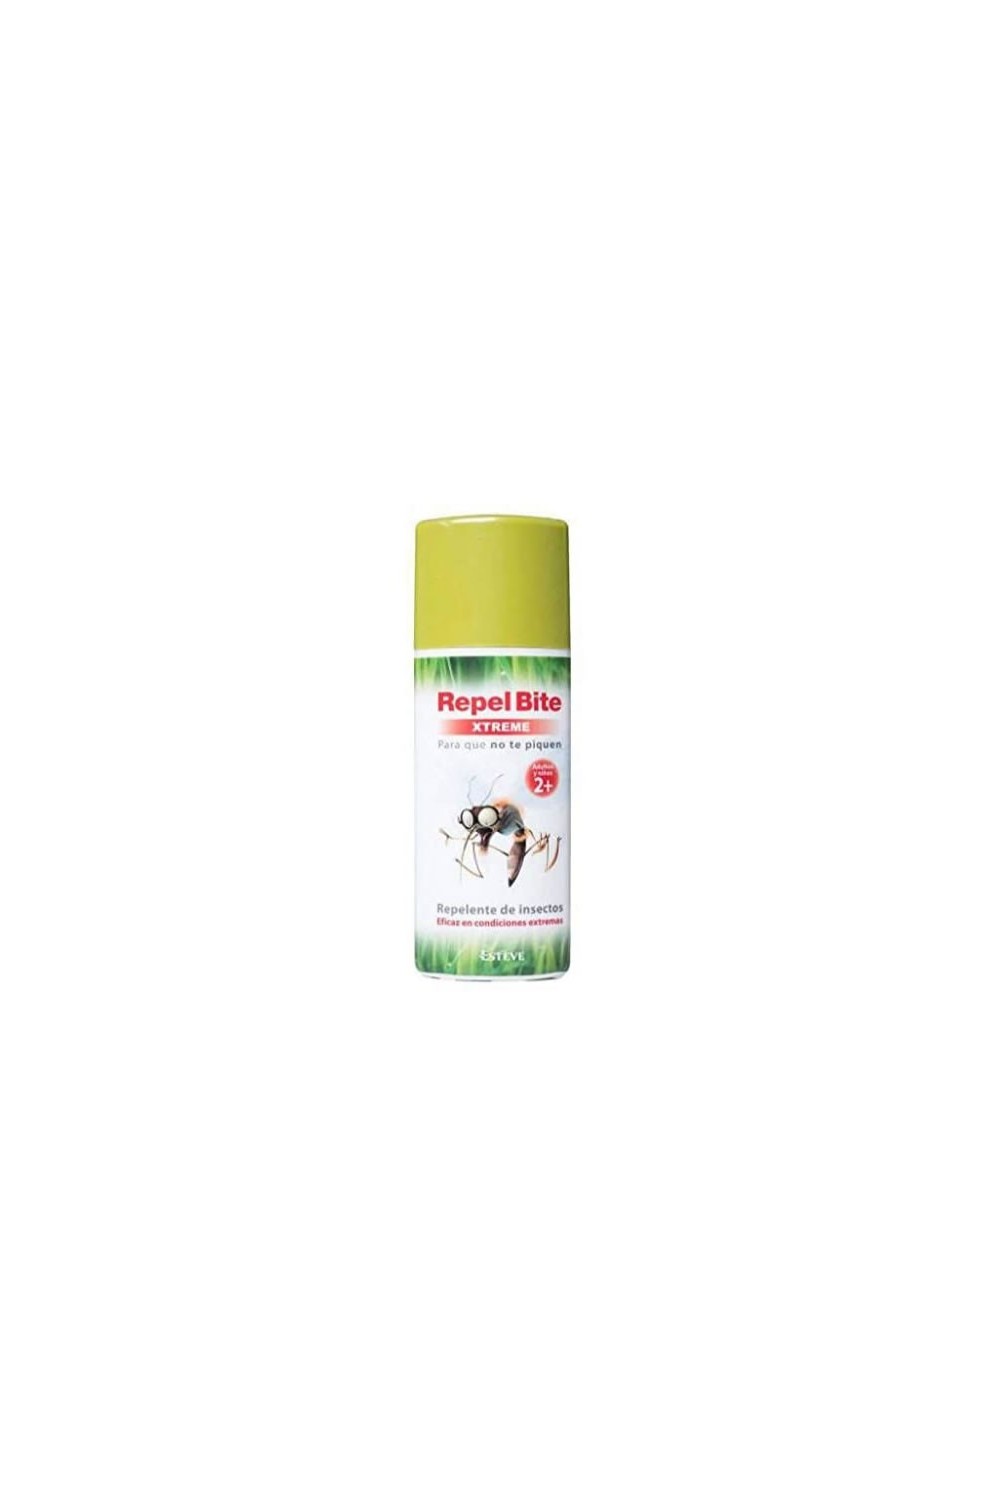 AFTERBITE - Repel Bite Xtreme Insect Repellent 100ml